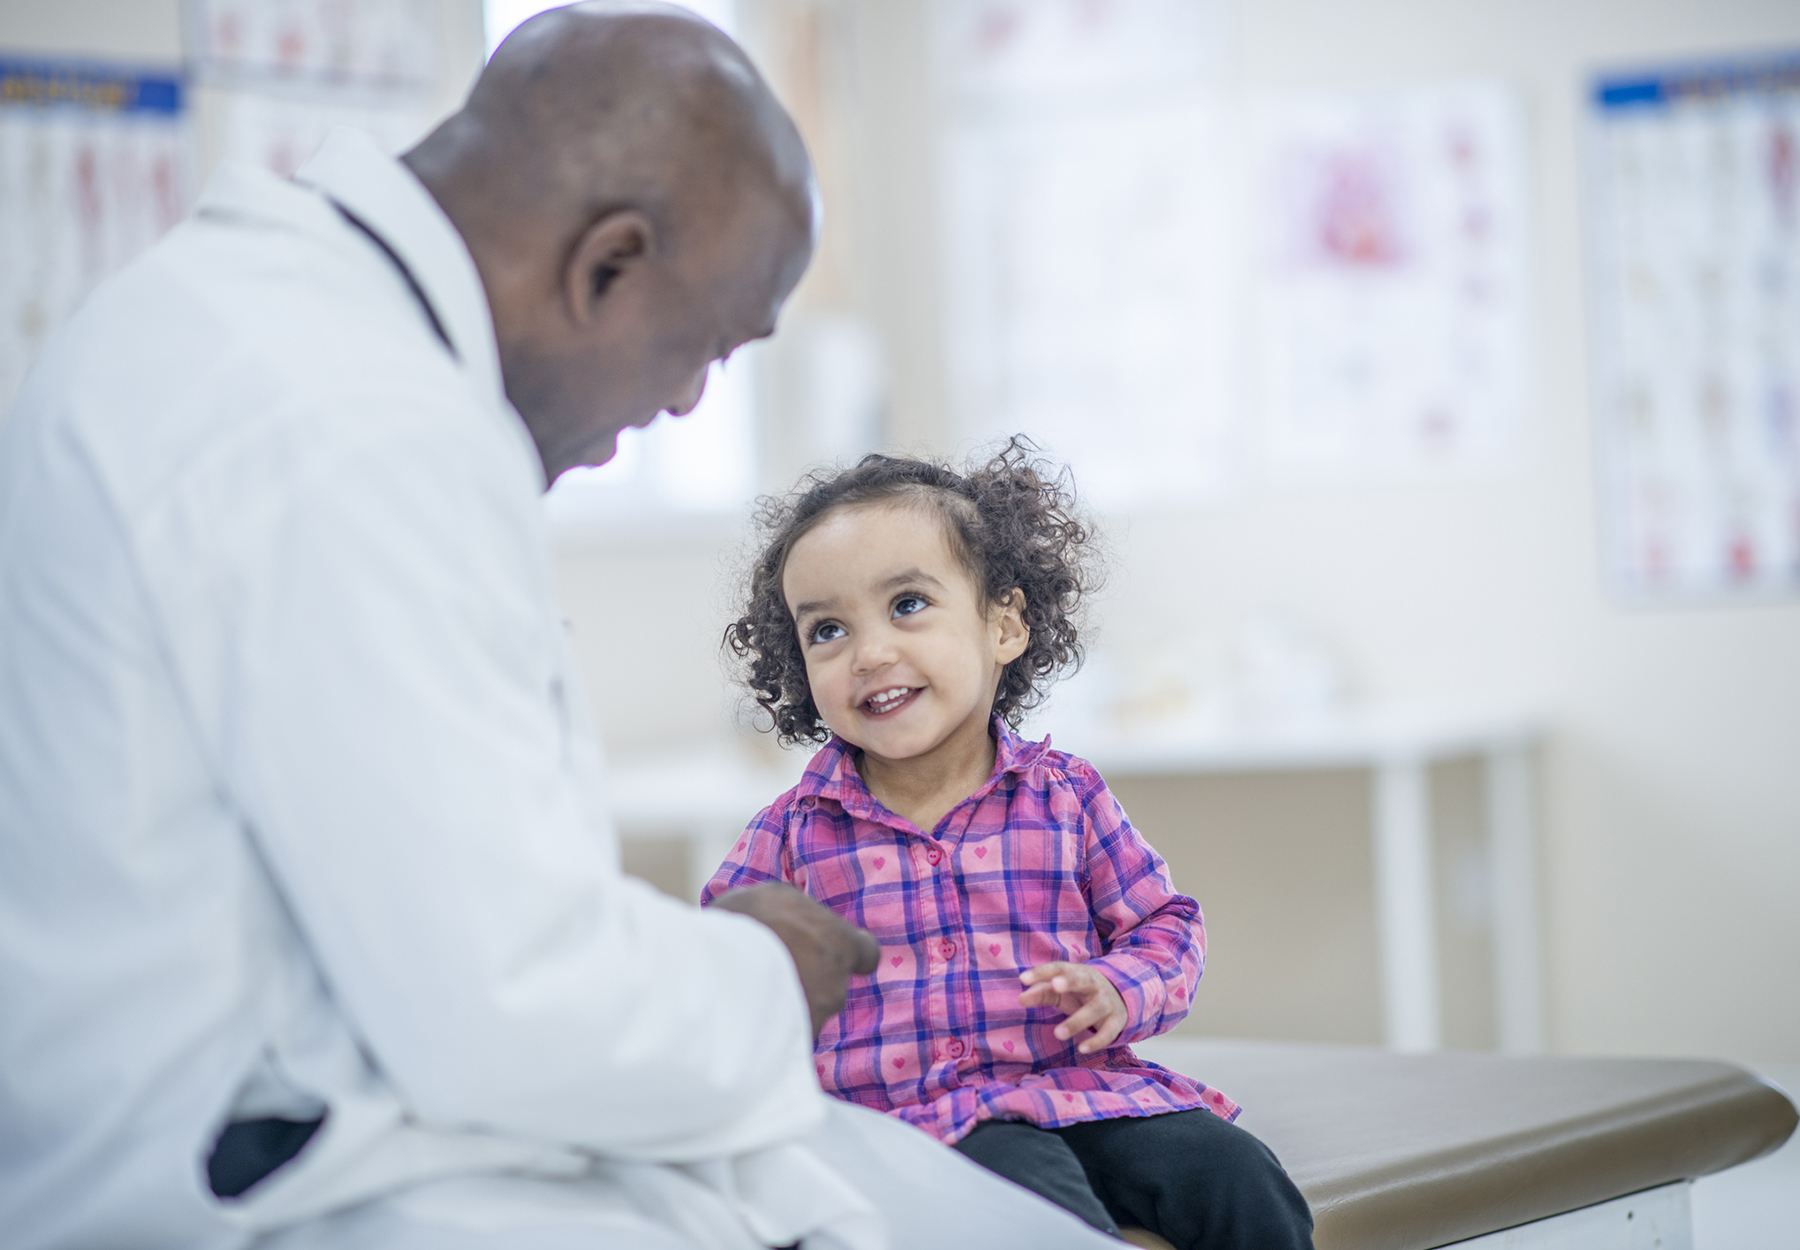 A male doctor is comforting a young girl before her checkup. They are indoors in a medical office.